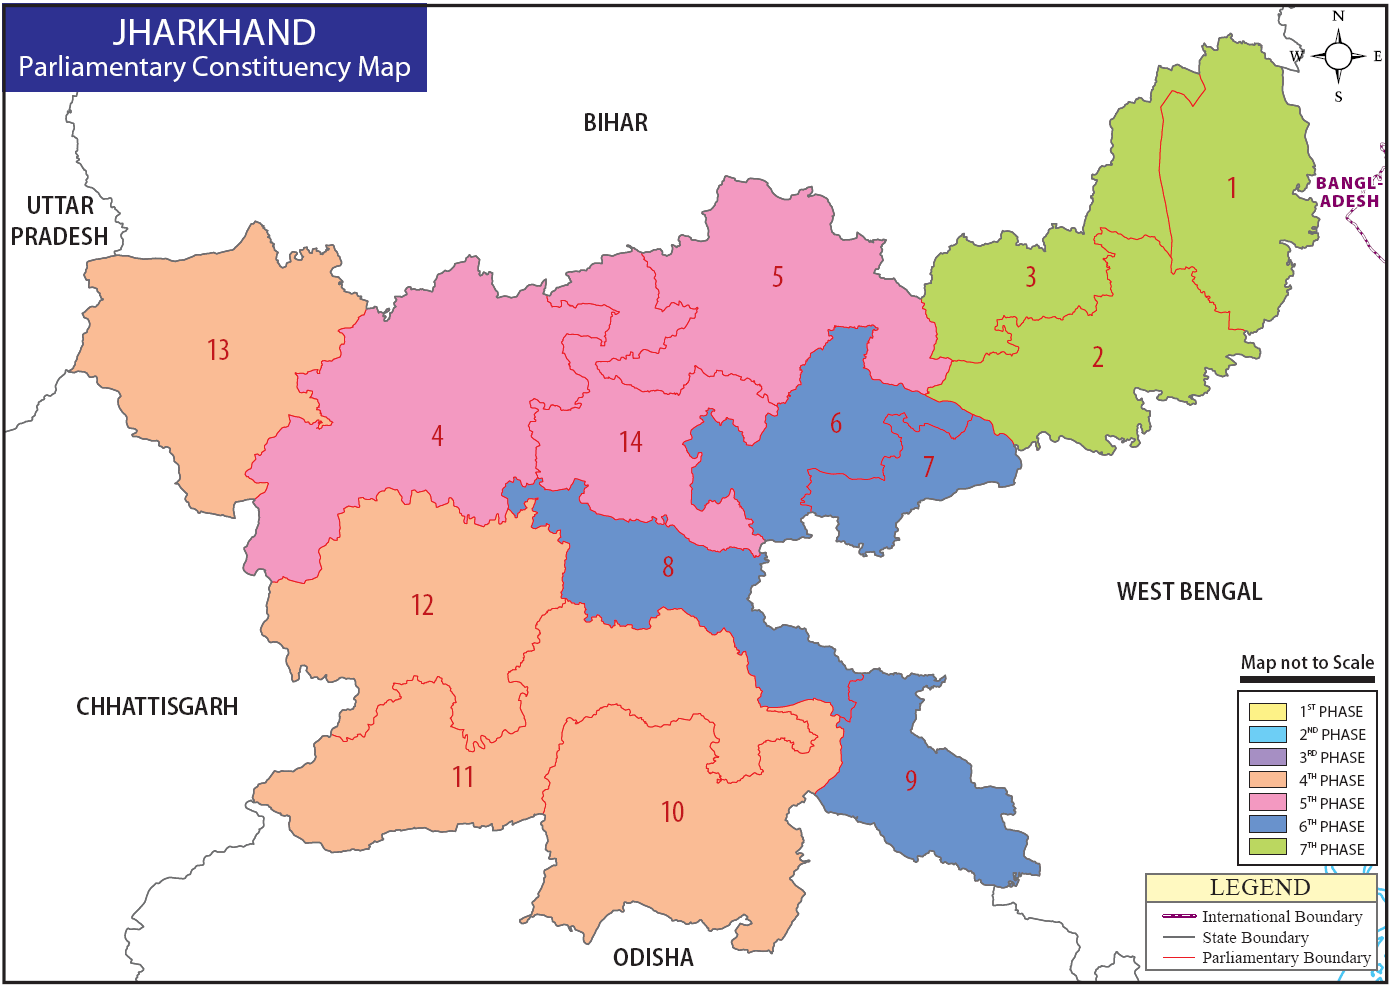 Jharkhand Parliamentary Constituency Map